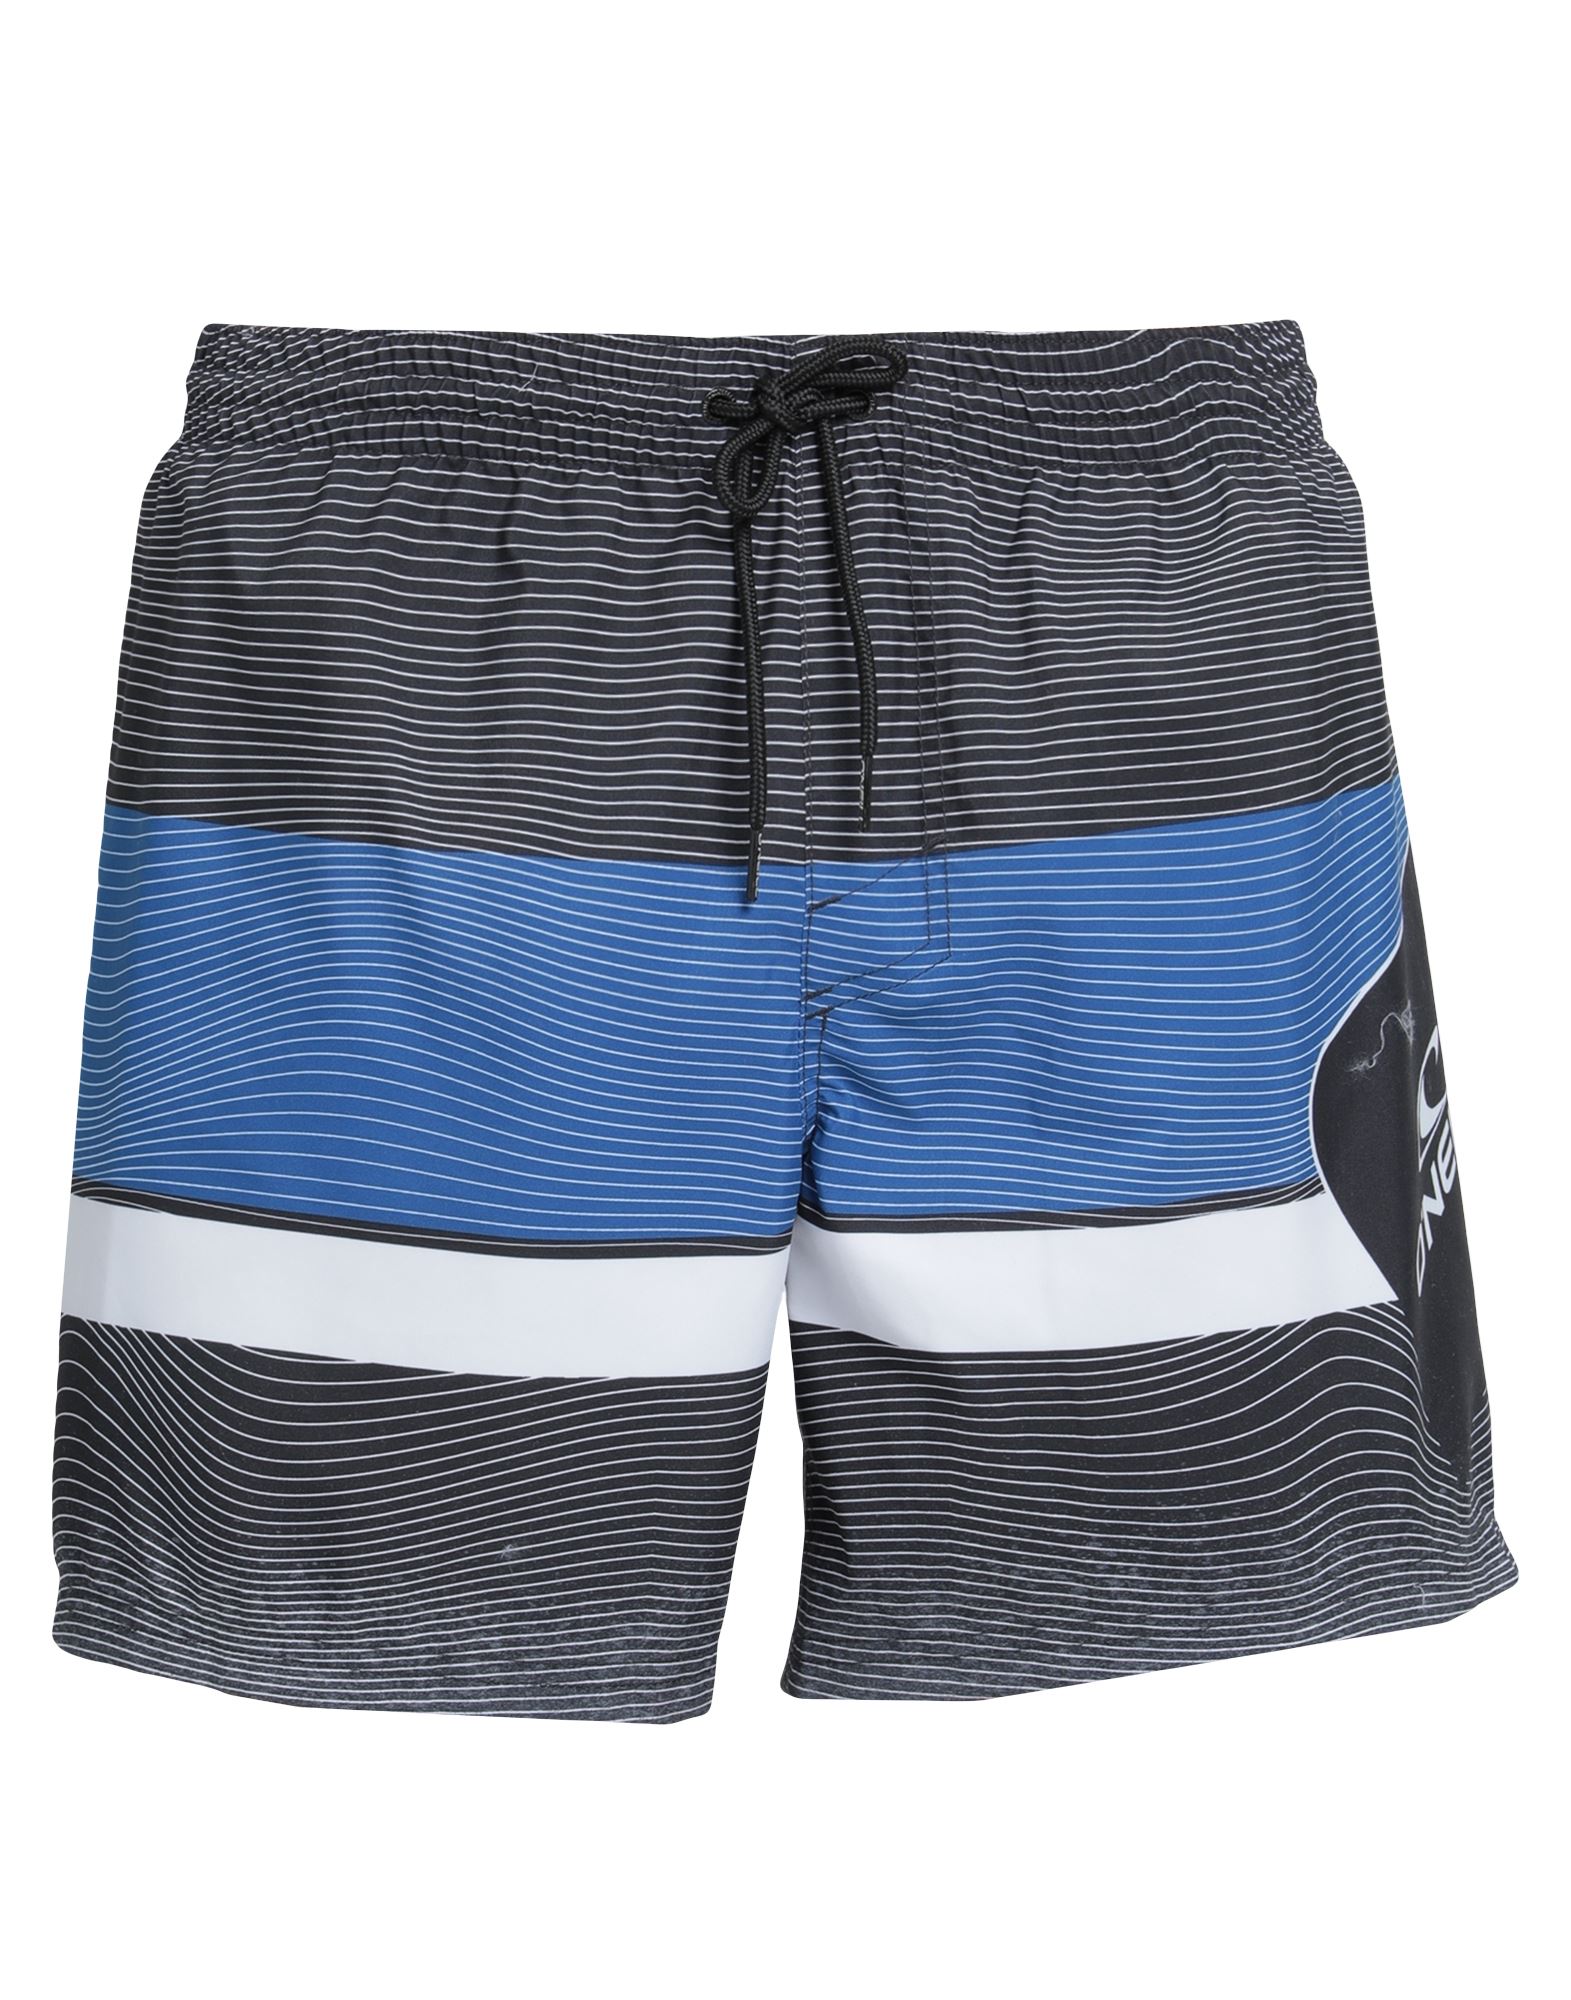 O'neill Man Swim Trunks Black Size Xs Polyester, Recycled Polyester